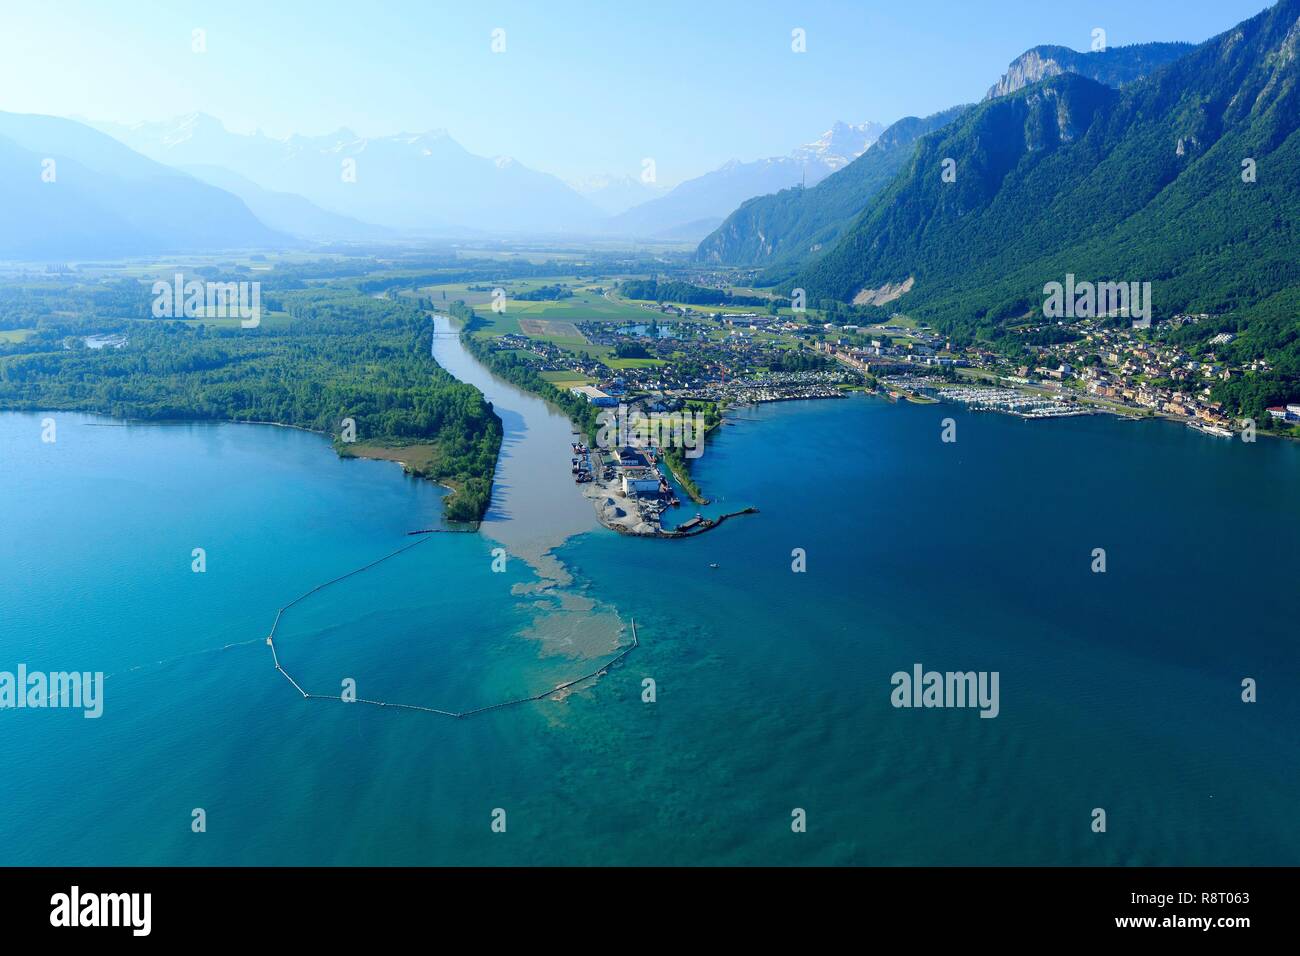 Switzerland, canton of Vaud district of Aigle and canton of Valais, district of Monthey, Noville, Lake Geneva, mouth of the Rhone, Port Valais on the right (aerial view) Stock Photo